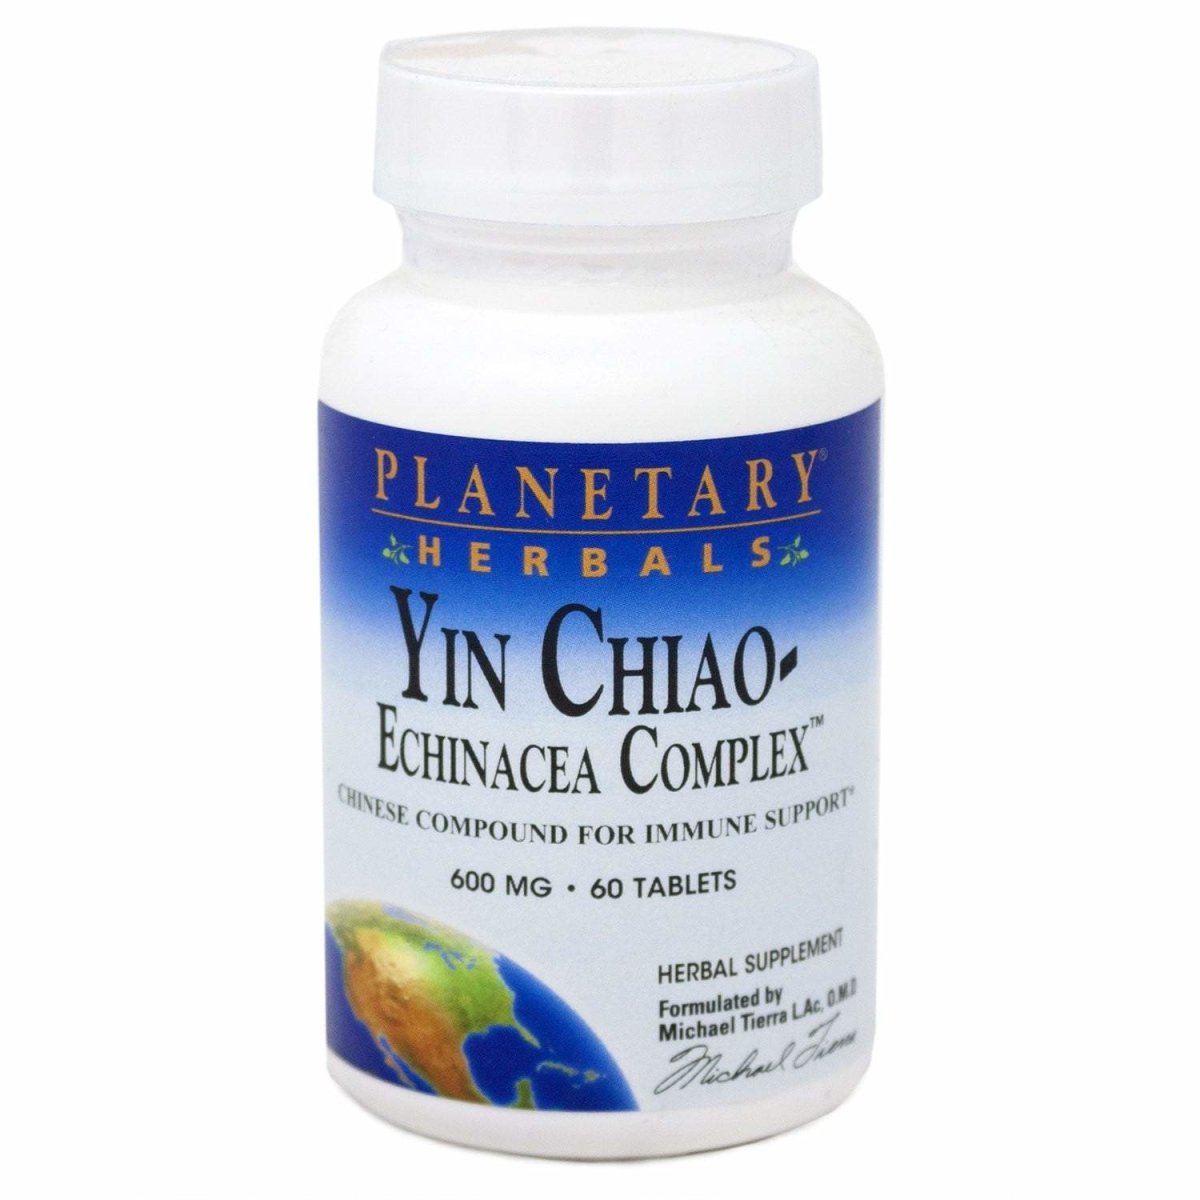 Planetary Herbals Yin Chiao-Echinacea Complex 600mg, 60 tablets